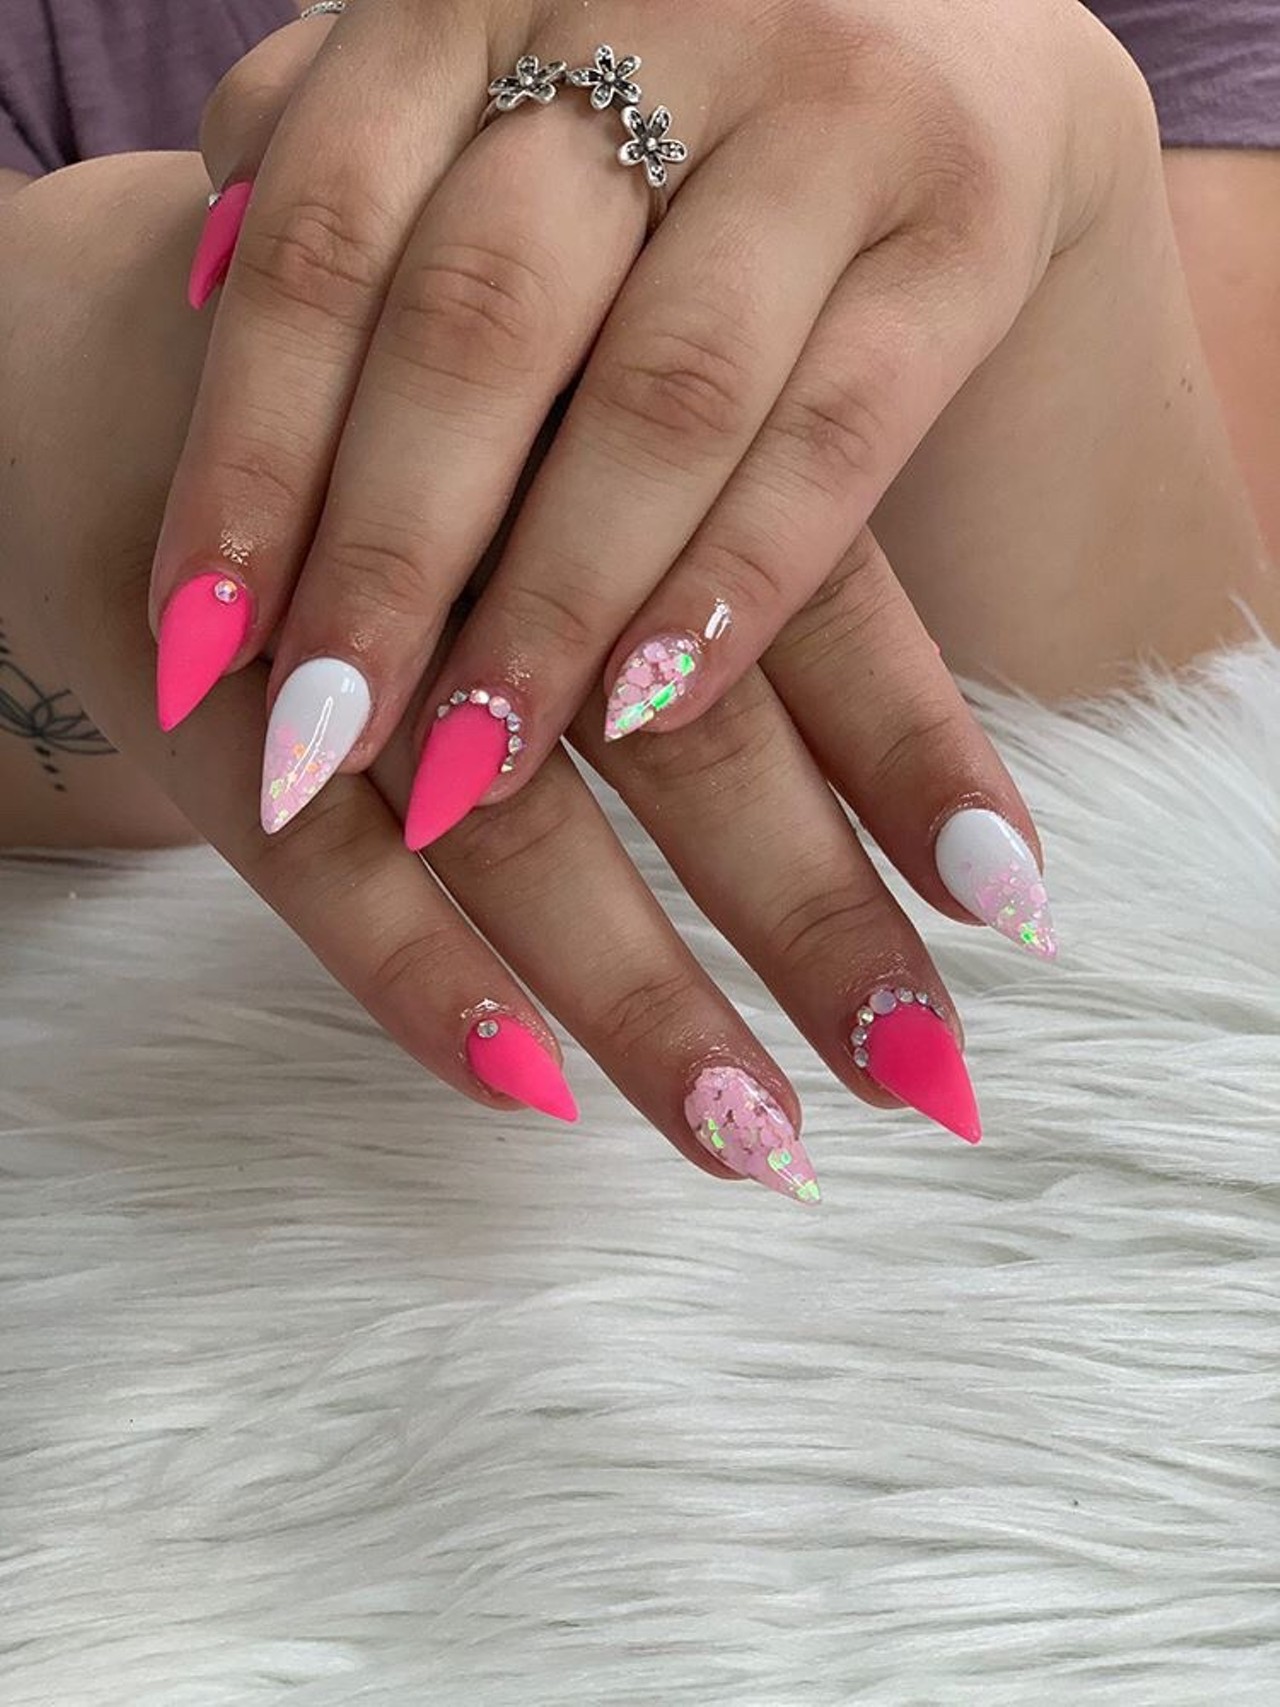 Nails by BriBri
@nailsby_bribri
8011 Allen Rd., Allen Park
Just like her Instagram, she goes by Bri Bri at the Fabulous Nails salon located in Allen Park. She&#146;s been with the salon since its opening in the summer of 2018. While her Instagram mainly features acrylic nails, she can also provide gel manicures and pedicures. 
Courtesy of Brianna